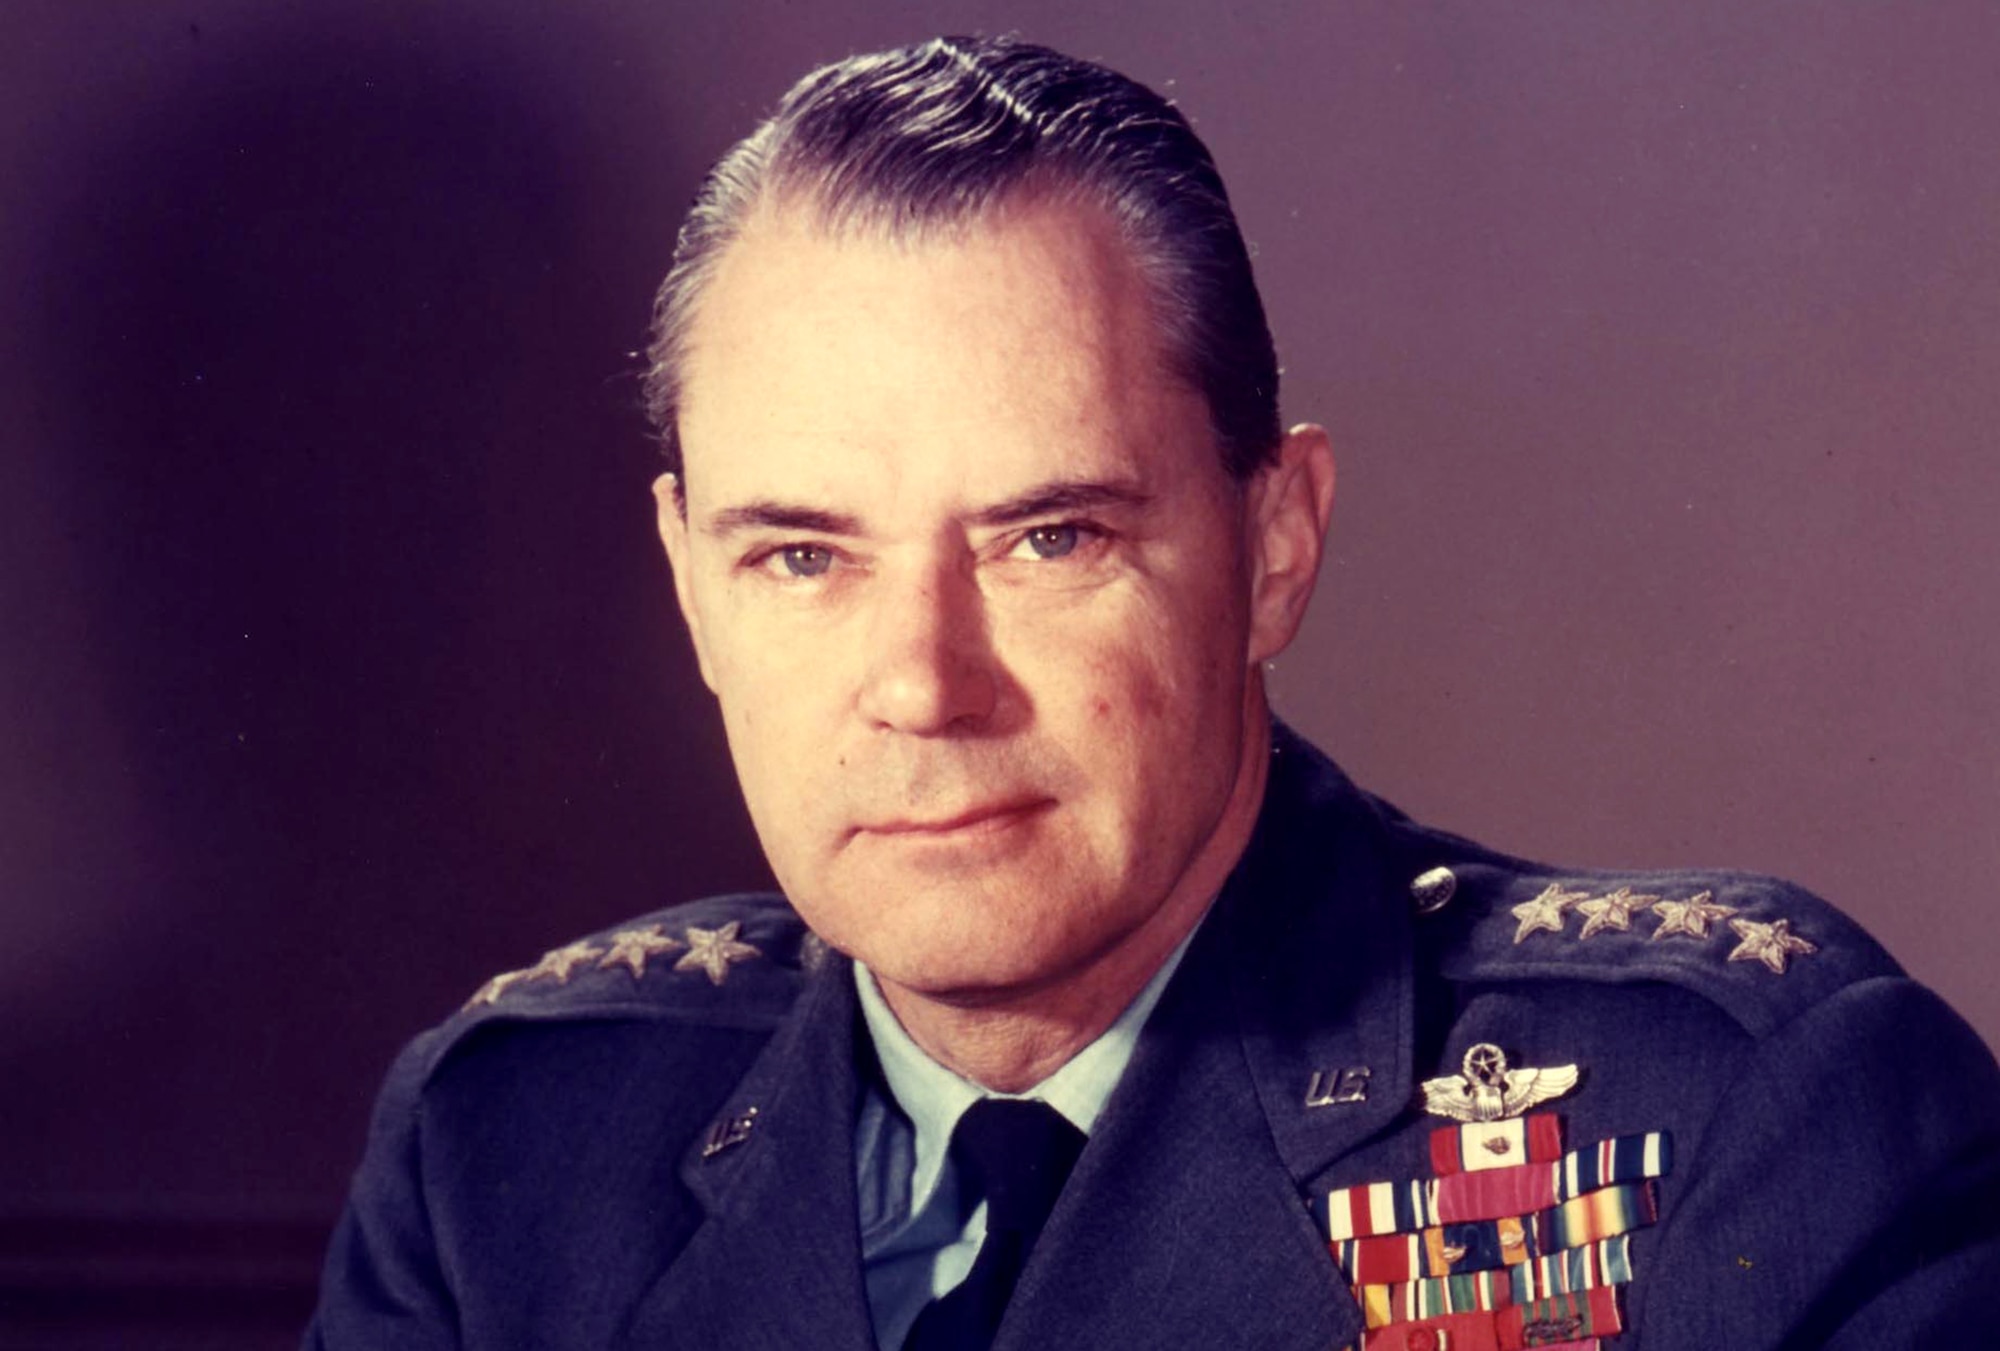 General Hoyt S. Vandenberg was the second chief of staff of the U.S. Air Force, Washington, D.C. The general was born at Milwaukee, Wis., in 1899. He graduated from the U.S. Military Academy June 12, 1923, and commissioned a second lieutenant in the Air Service. (U.S. Air Force photo)

